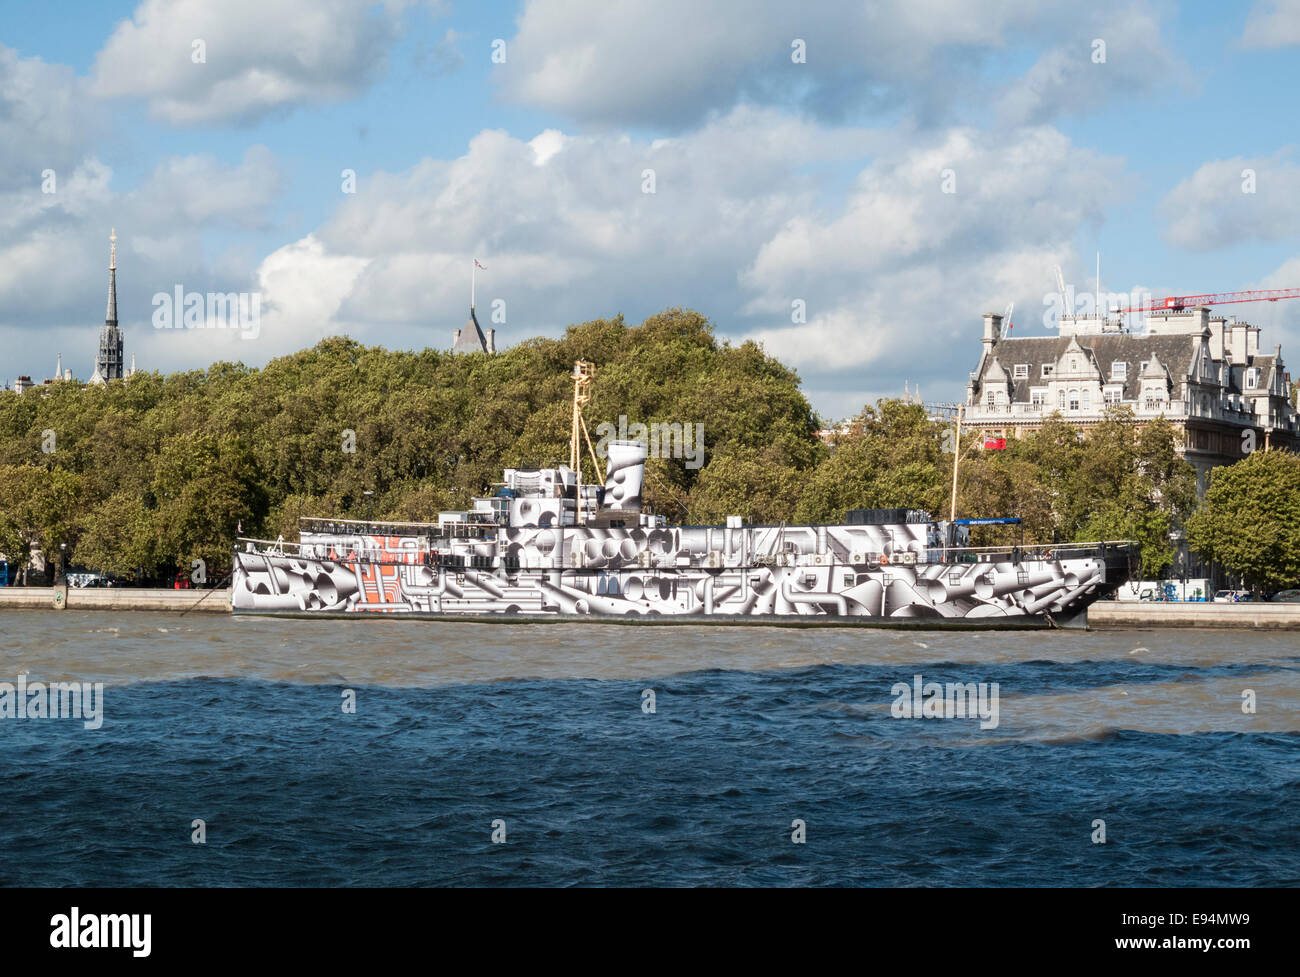 HMS President (HQMS President (1918)), moored on the River Thames, Victoria Embankment, London, one of three surviving WW1 warships, painted in a dazzle design Stock Photo